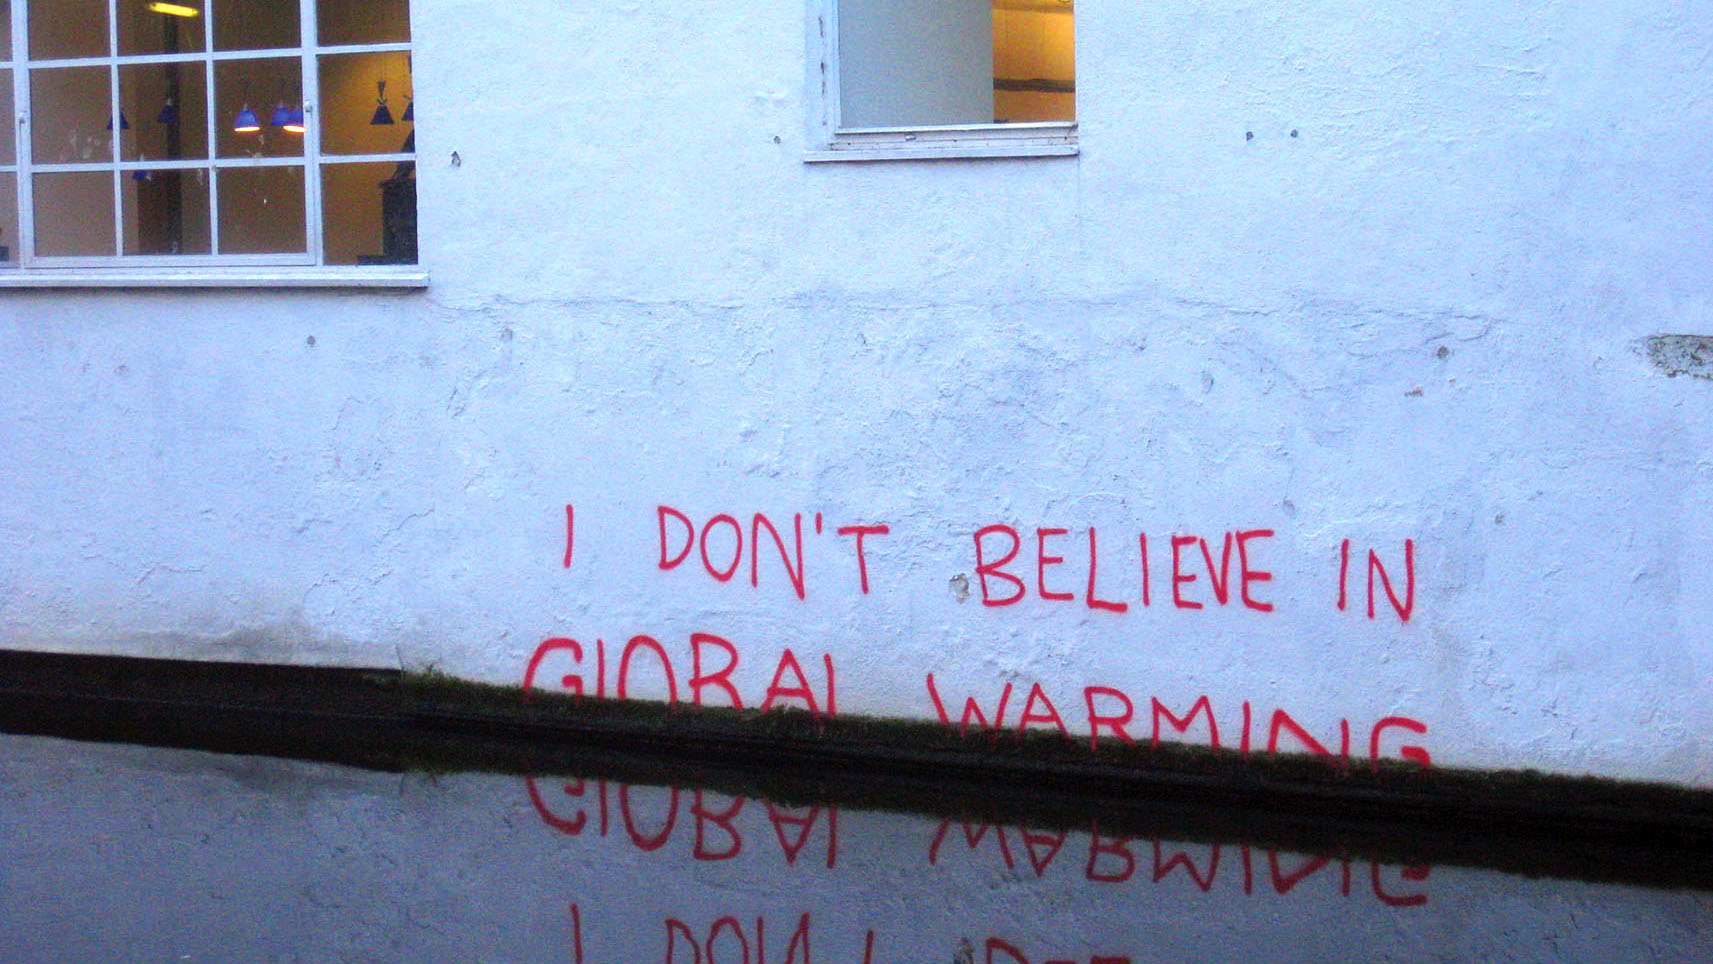 Climate change may lead to rising water levels, despite denials: a satiric piece of graffiti reads "I don't believe in global warming" as it disappears underwater. (Photo by Matt Brown.)